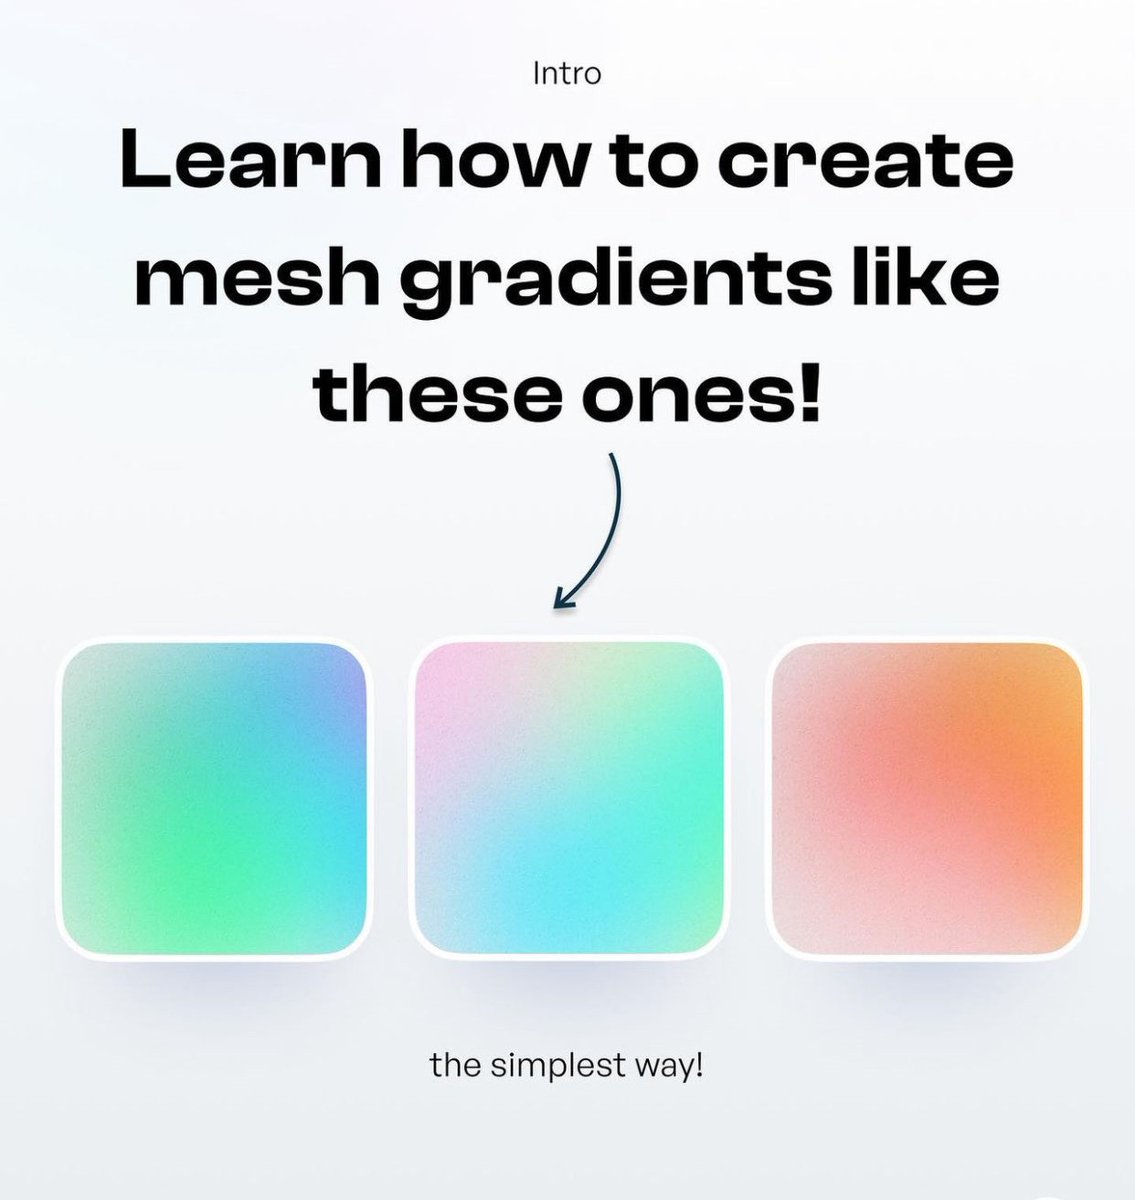 7 easy ways to make those mesh gradient designs you've been admiring from afar😊
 
shoutouts to @uiadrian for making this super simple,
check-in the 🧵 to learn more

#Figma #MeshGradients #Design